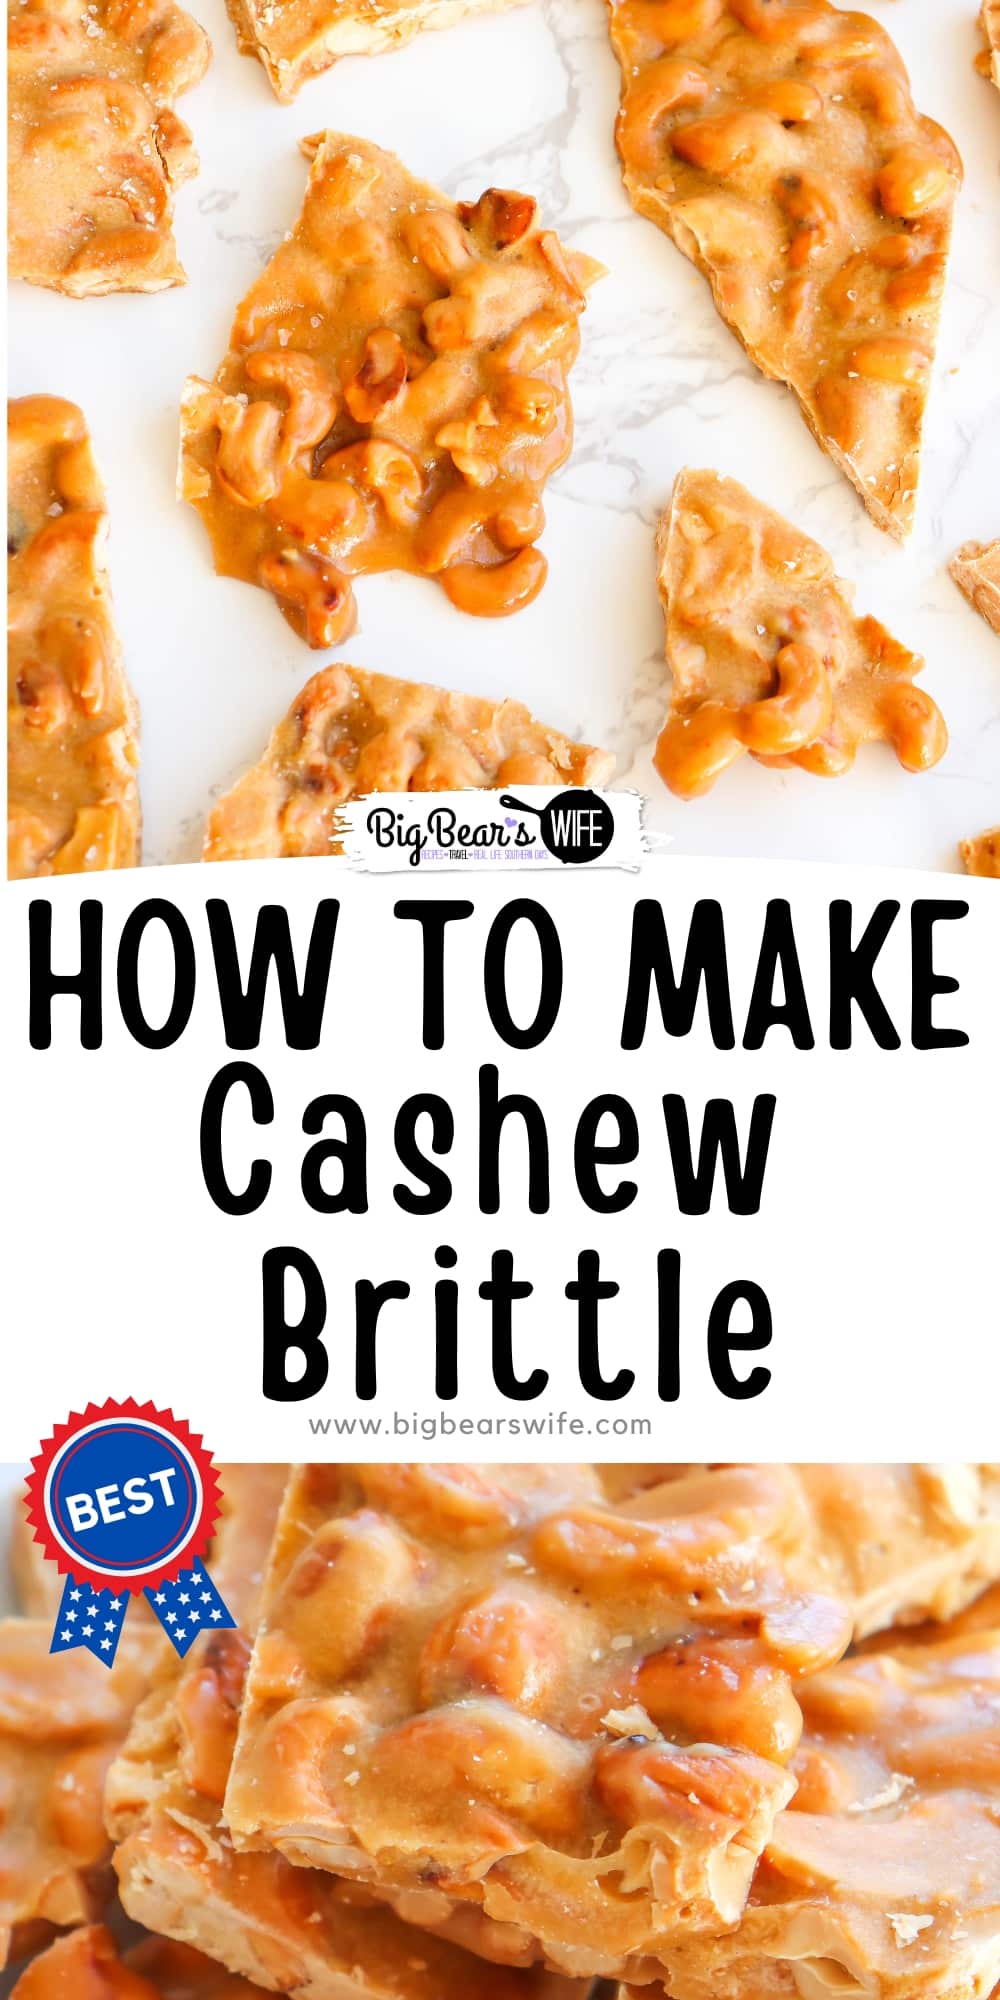 Ready to make the perfect “gift from the kitchen”? This easy homemade cashew brittle is easy to make and great to give away to friends and family around the holidays or perfect for nibbling on while watching a movie at home. Best part is this brittle won't break your teeth!  via @bigbearswife